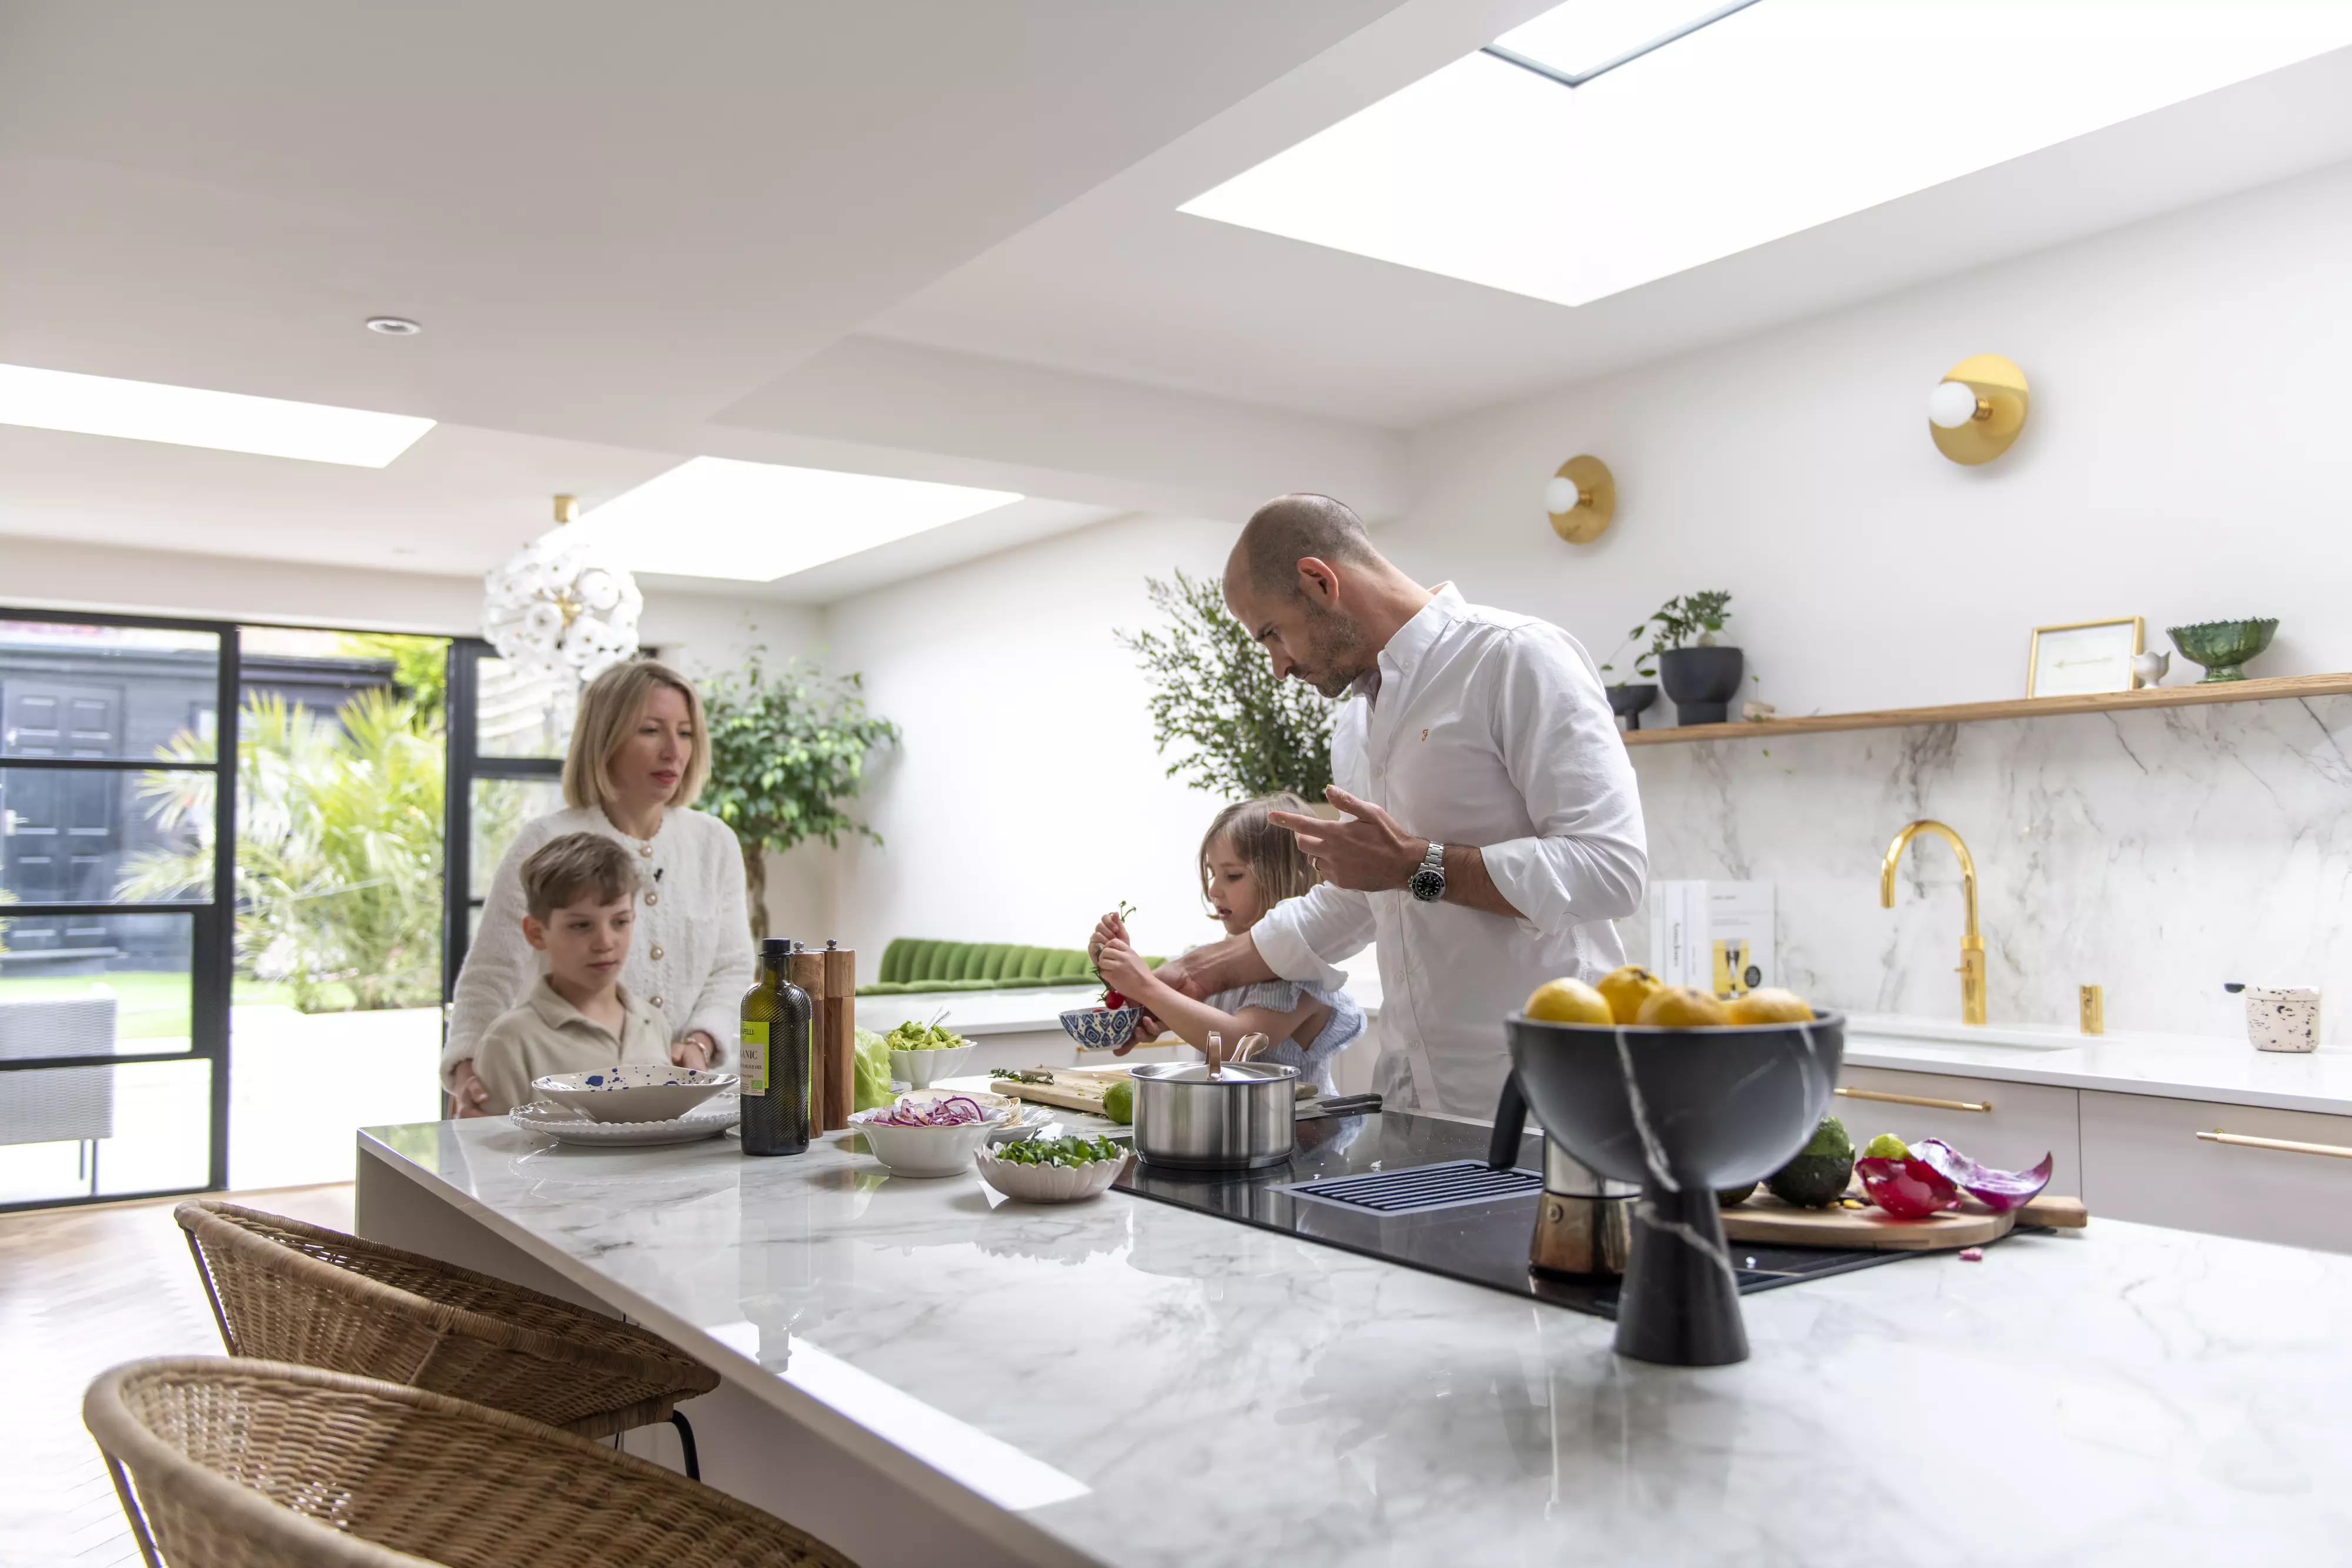 Modern kitchen with VELUX roof window, family cooking together, marble countertops.